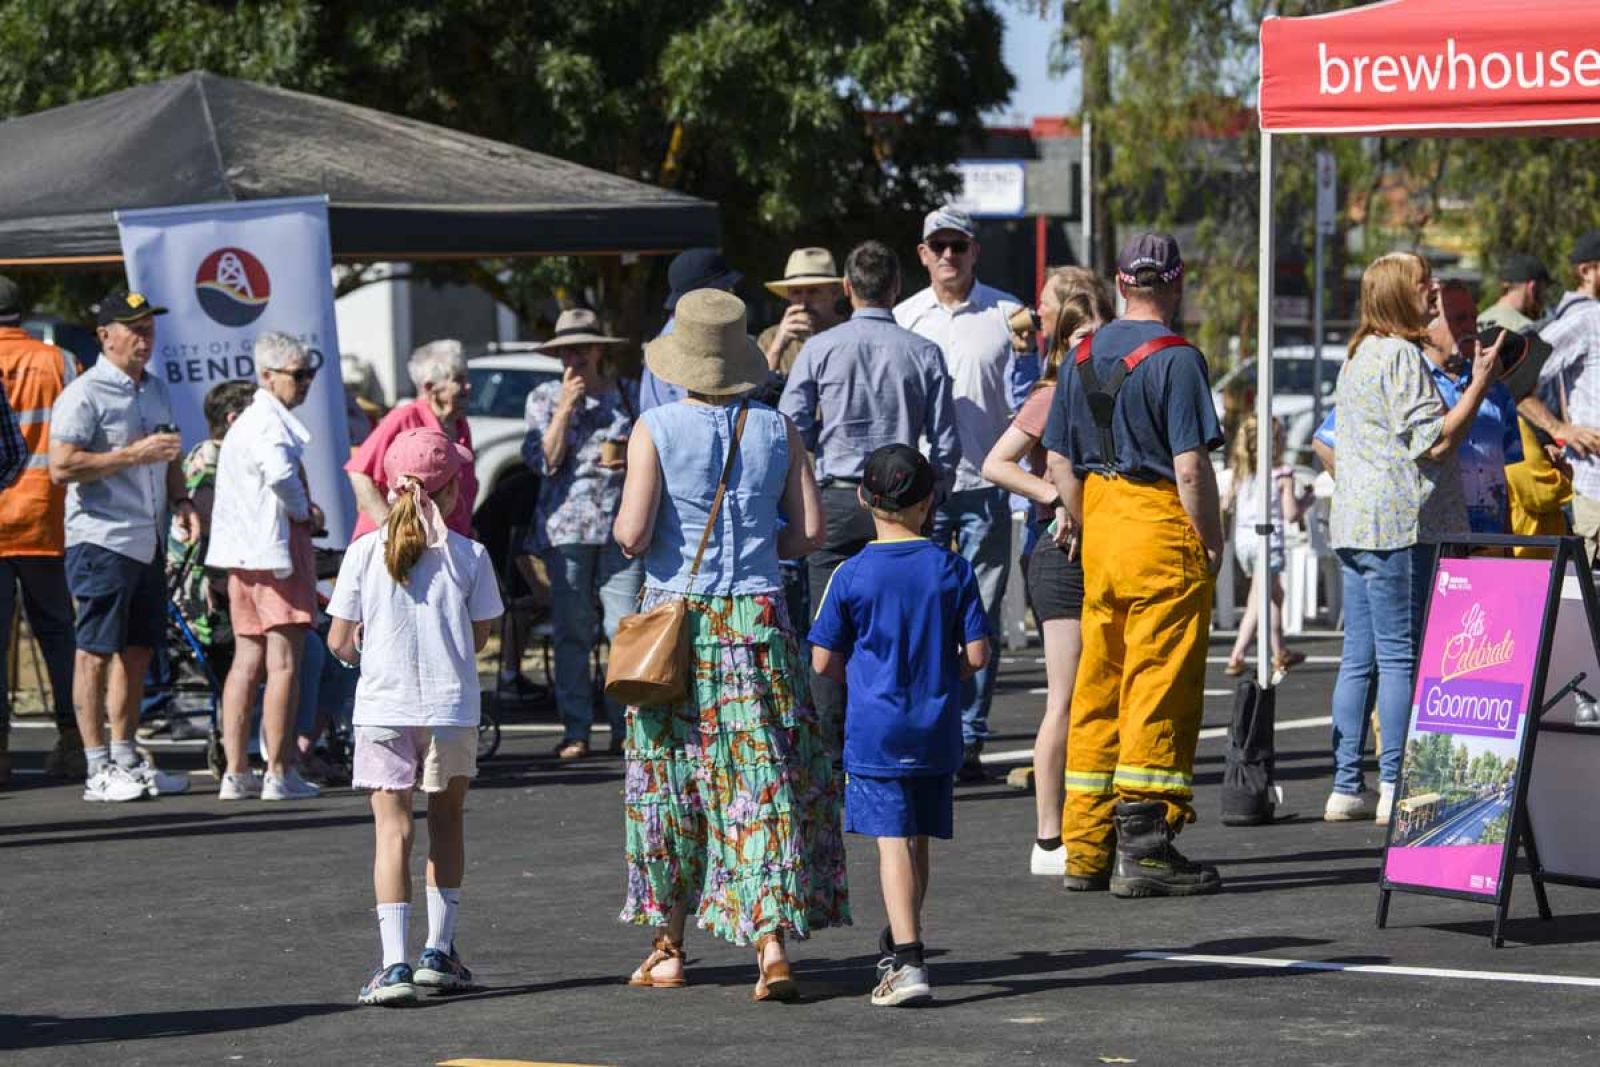 The Goornong Station community celebration event was well attended, with free food and drinks, games and live music among the attractions enjoyed by patrons. 